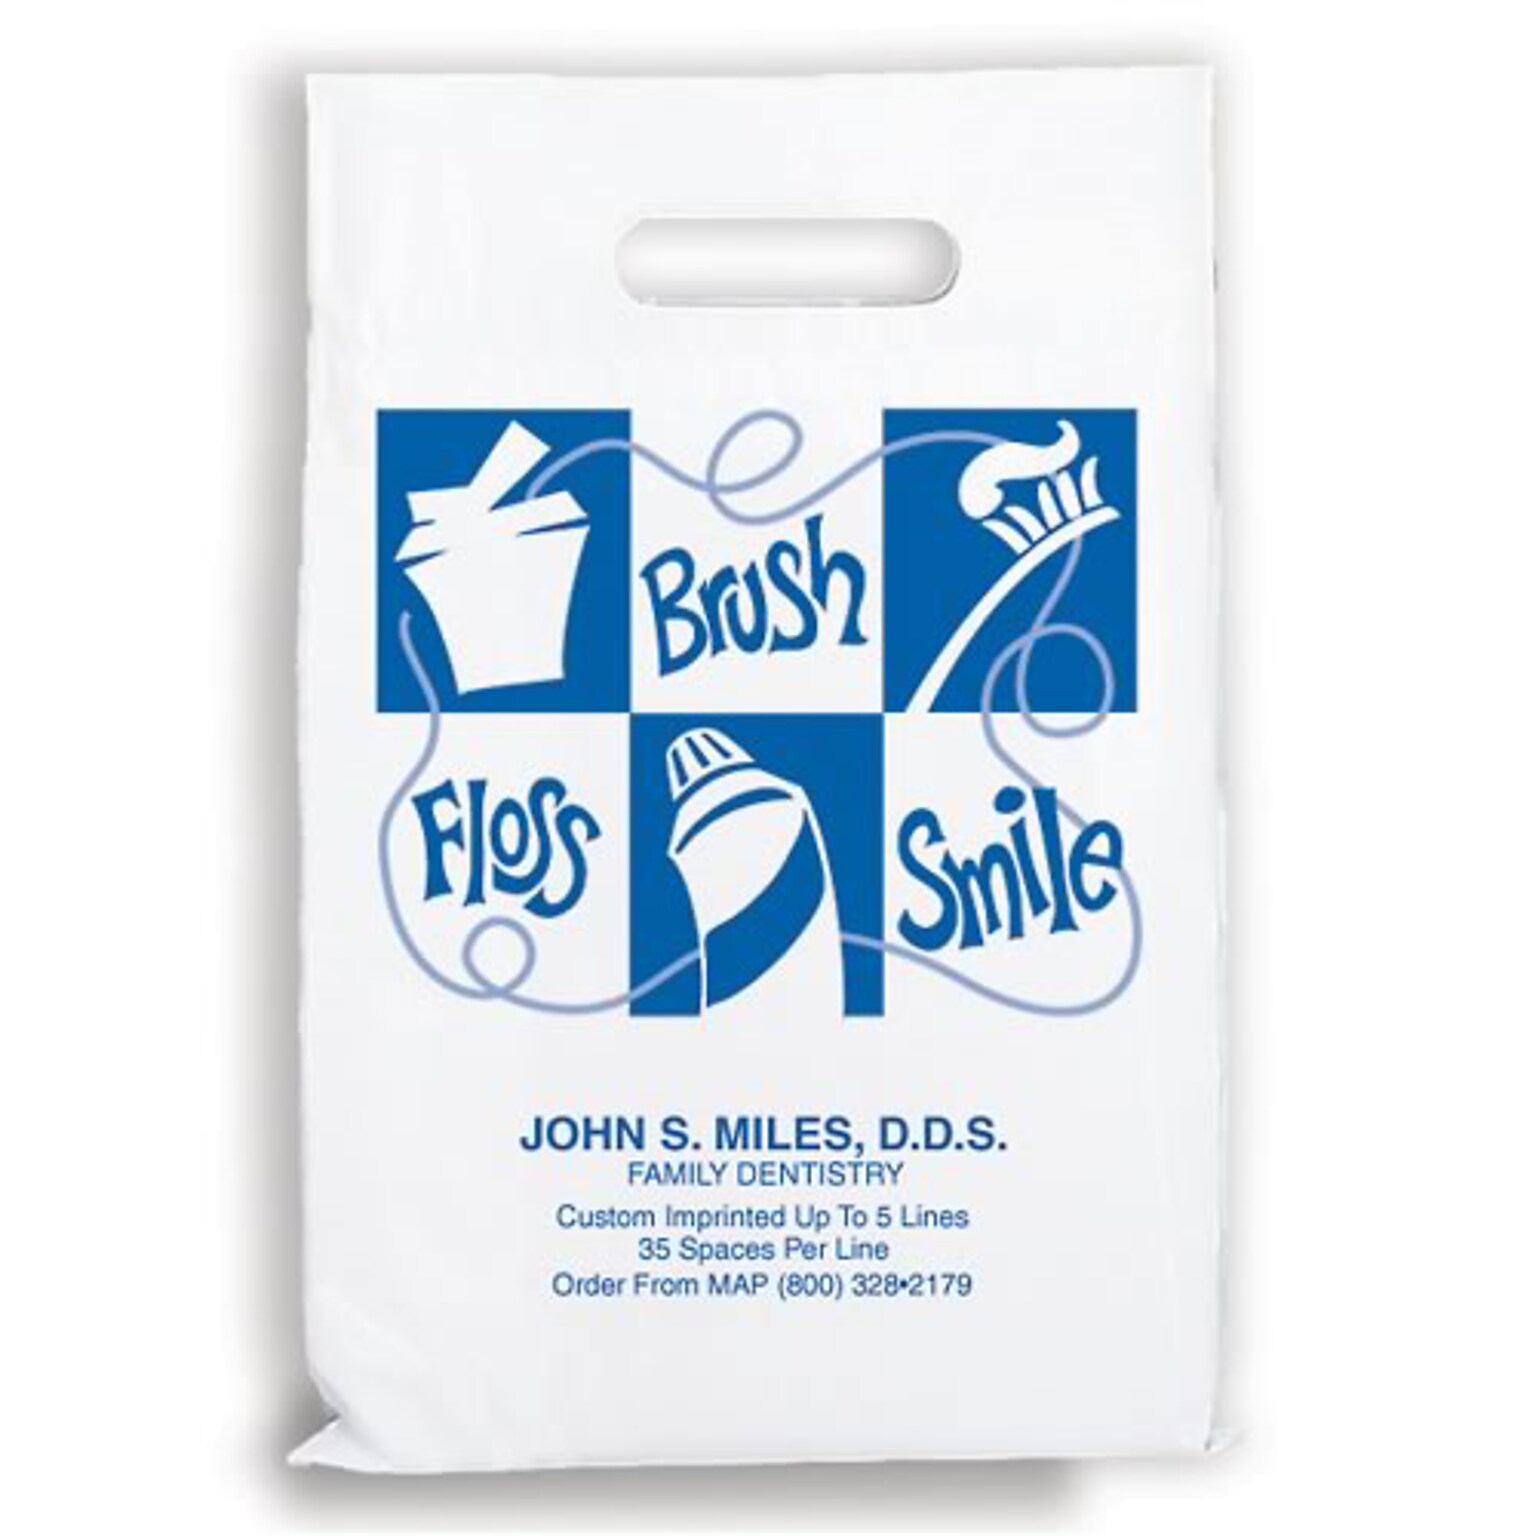 Medical Arts Press® Dental Personalized 1-Color Supply Bags; 9 x 13, Floss Brush Smile, 100 Bags, (725181)